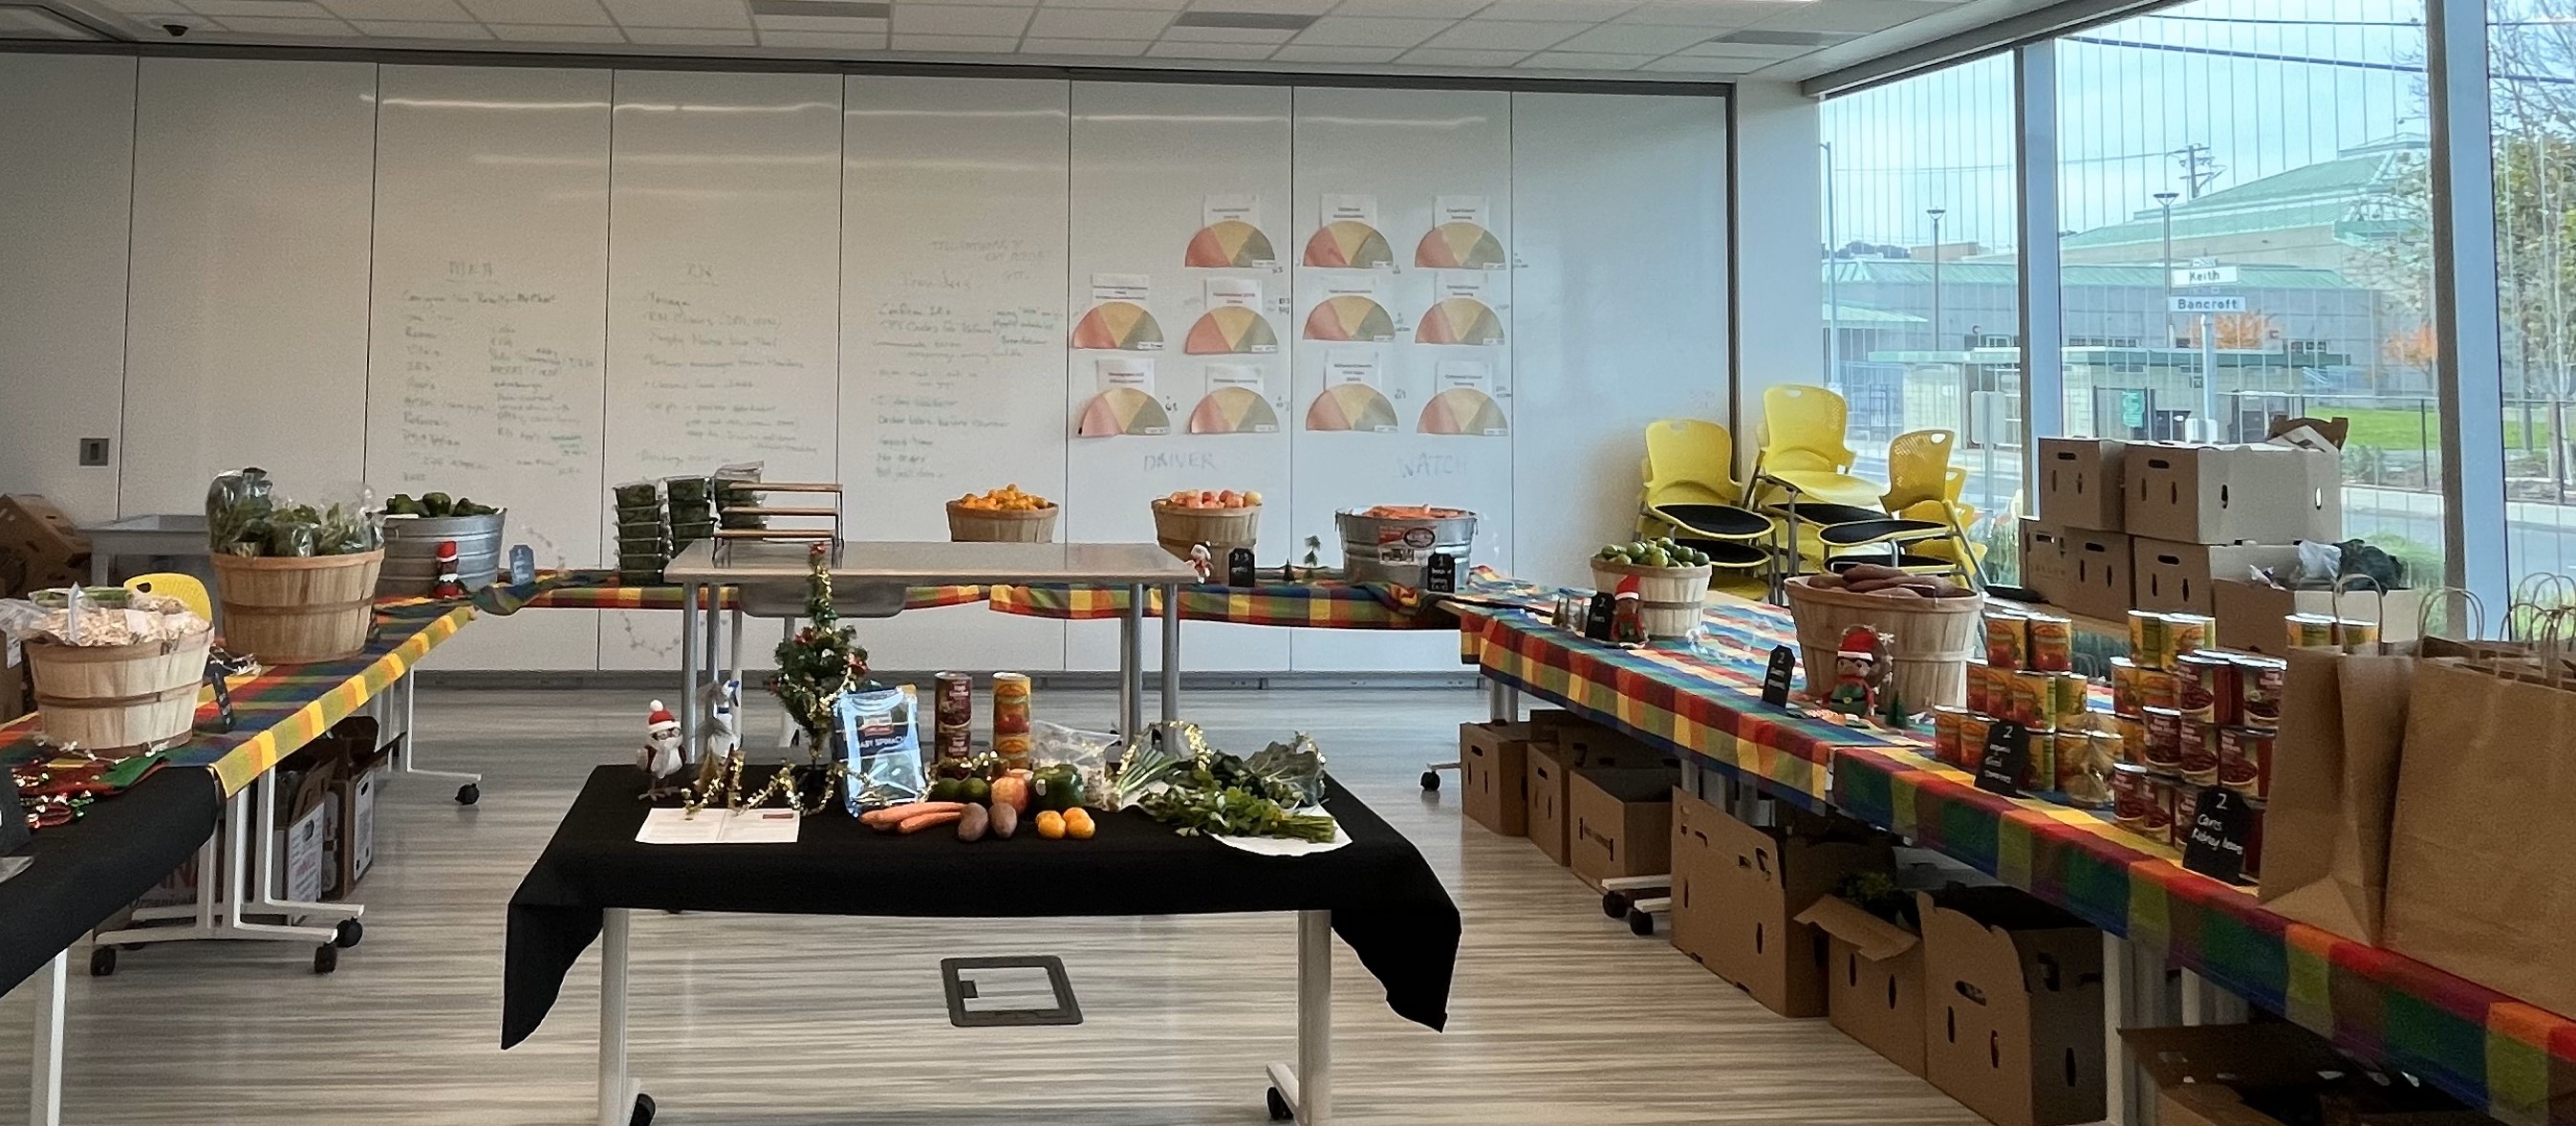 A Photo of the Food Pharmacy set up can be seen here. This includes tables in "U" formation with a variety of produce and ingredients, as well as a central table that shows a selection of what is available on that day. 